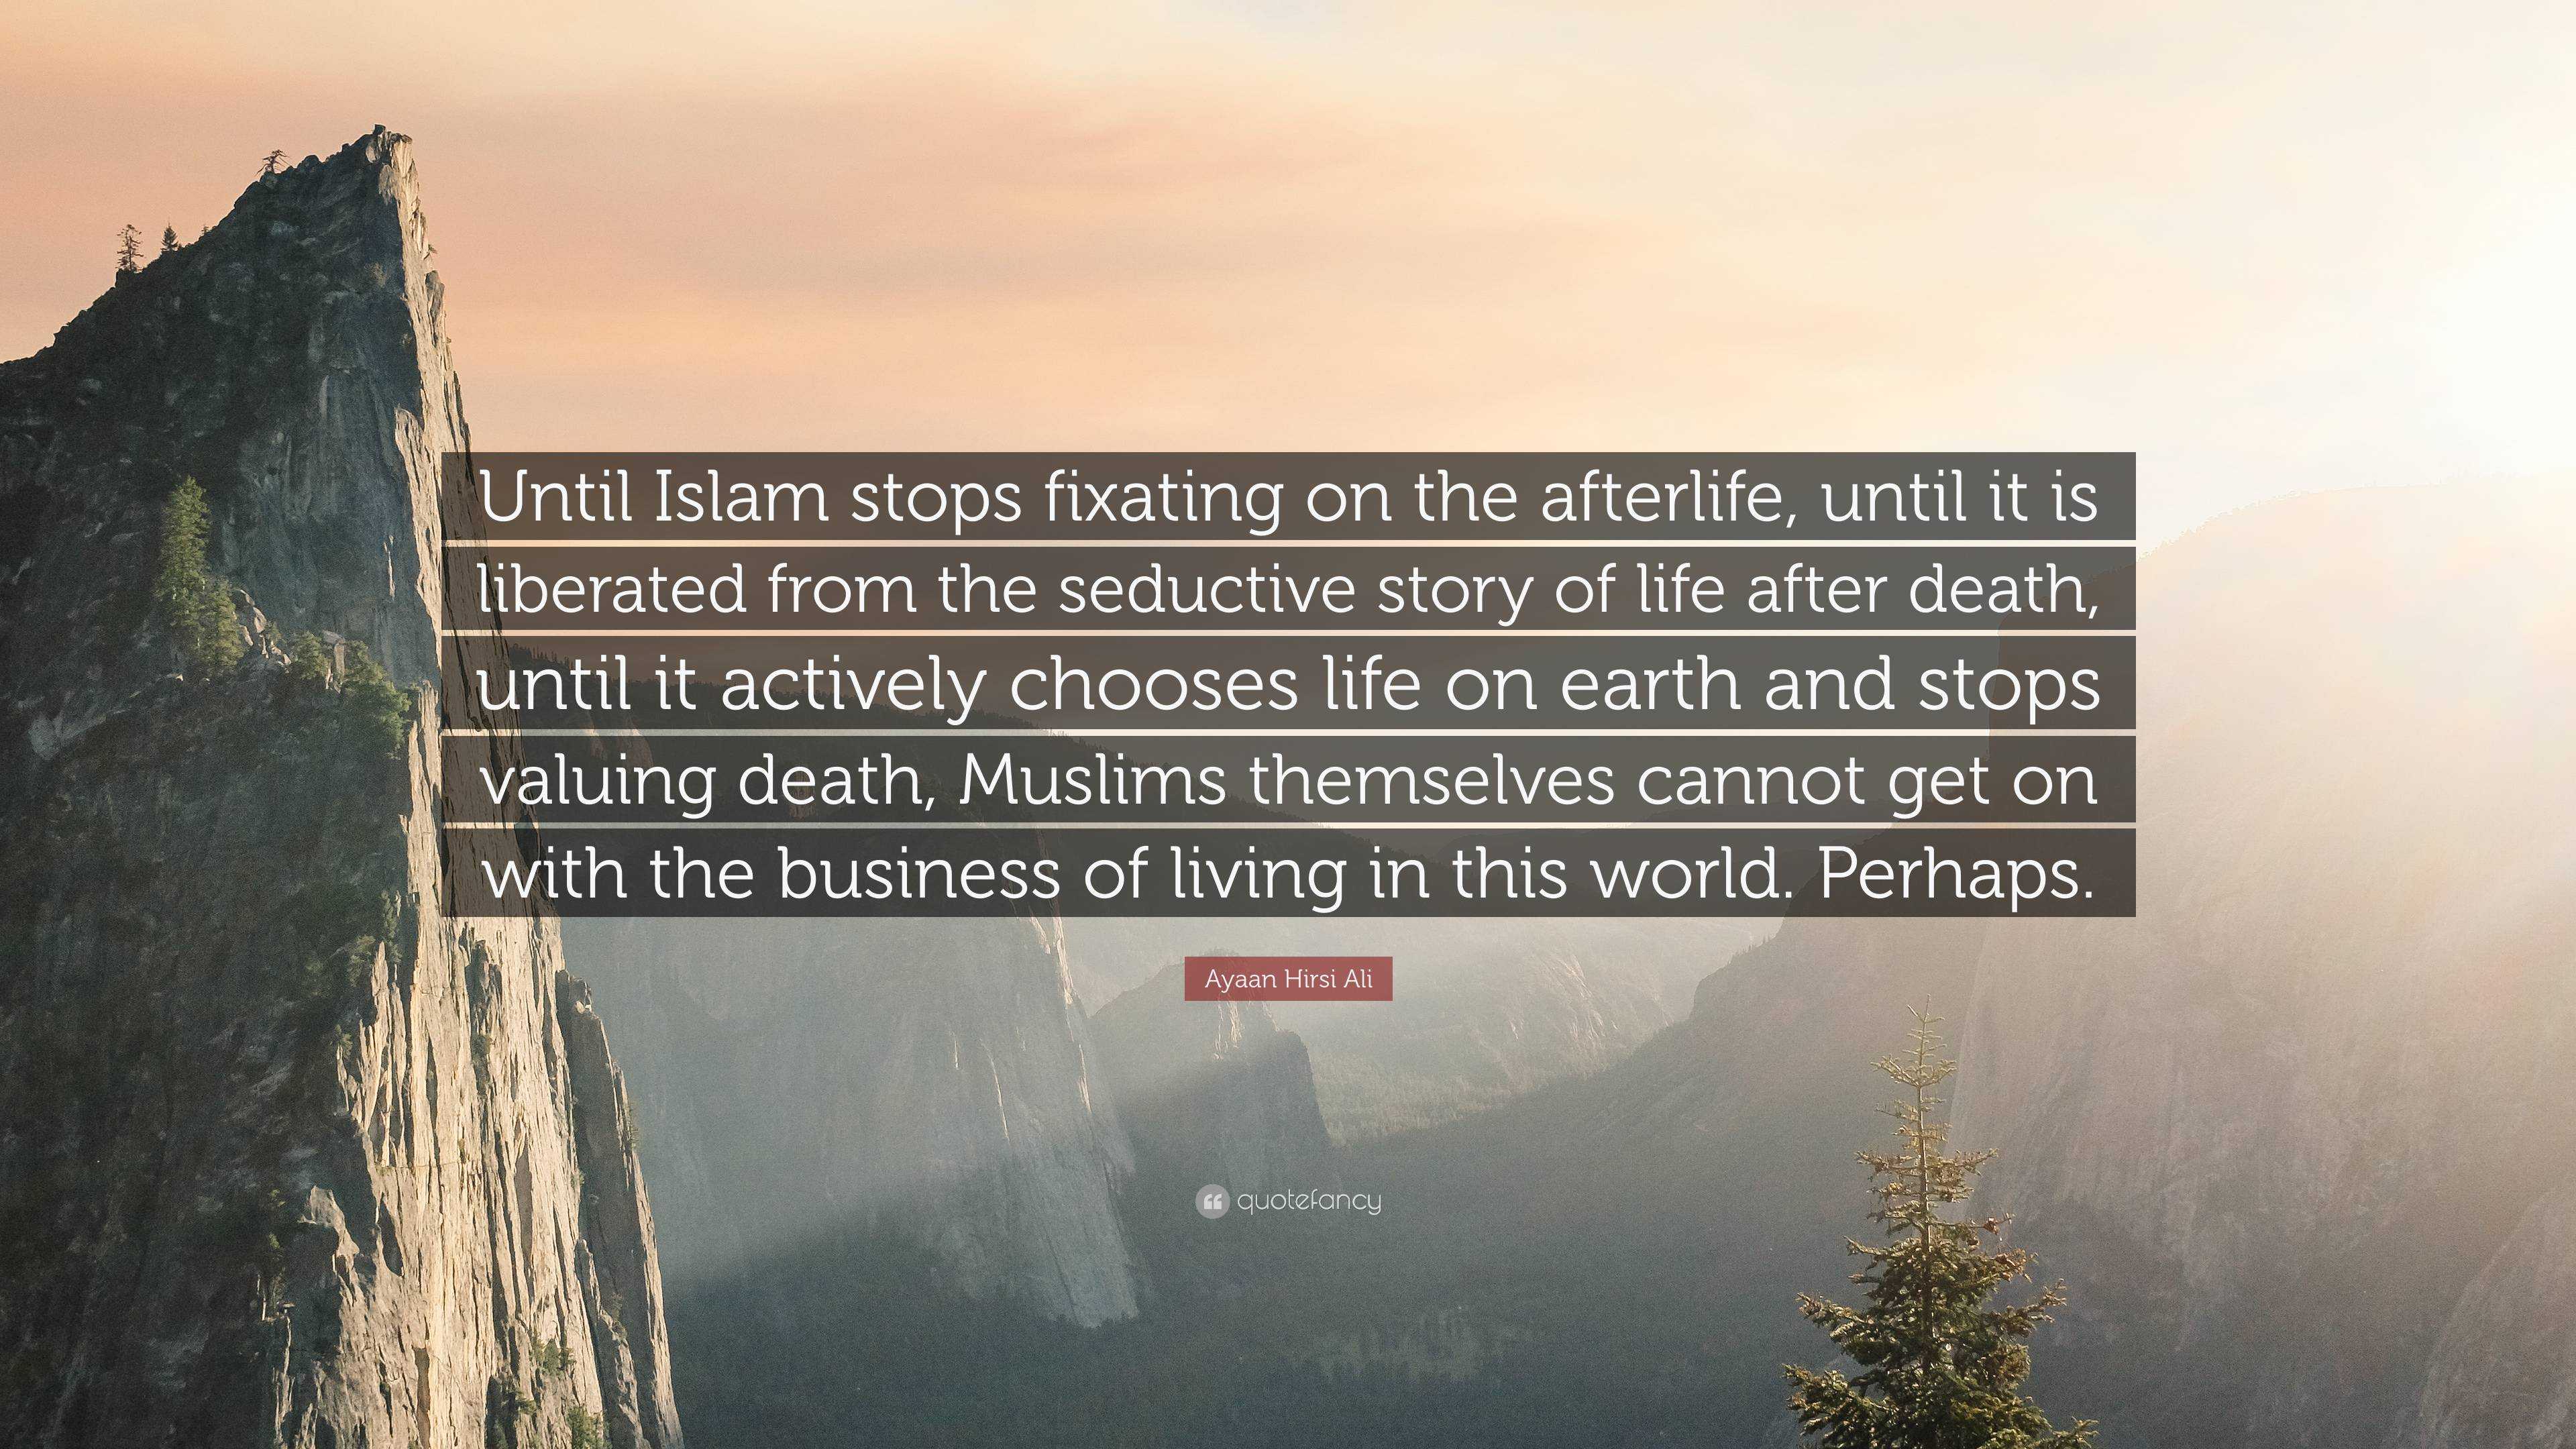 Ayaan Hirsi Ali Quote “until Islam Stops Fixating On The Afterlife Until It Is Liberated From